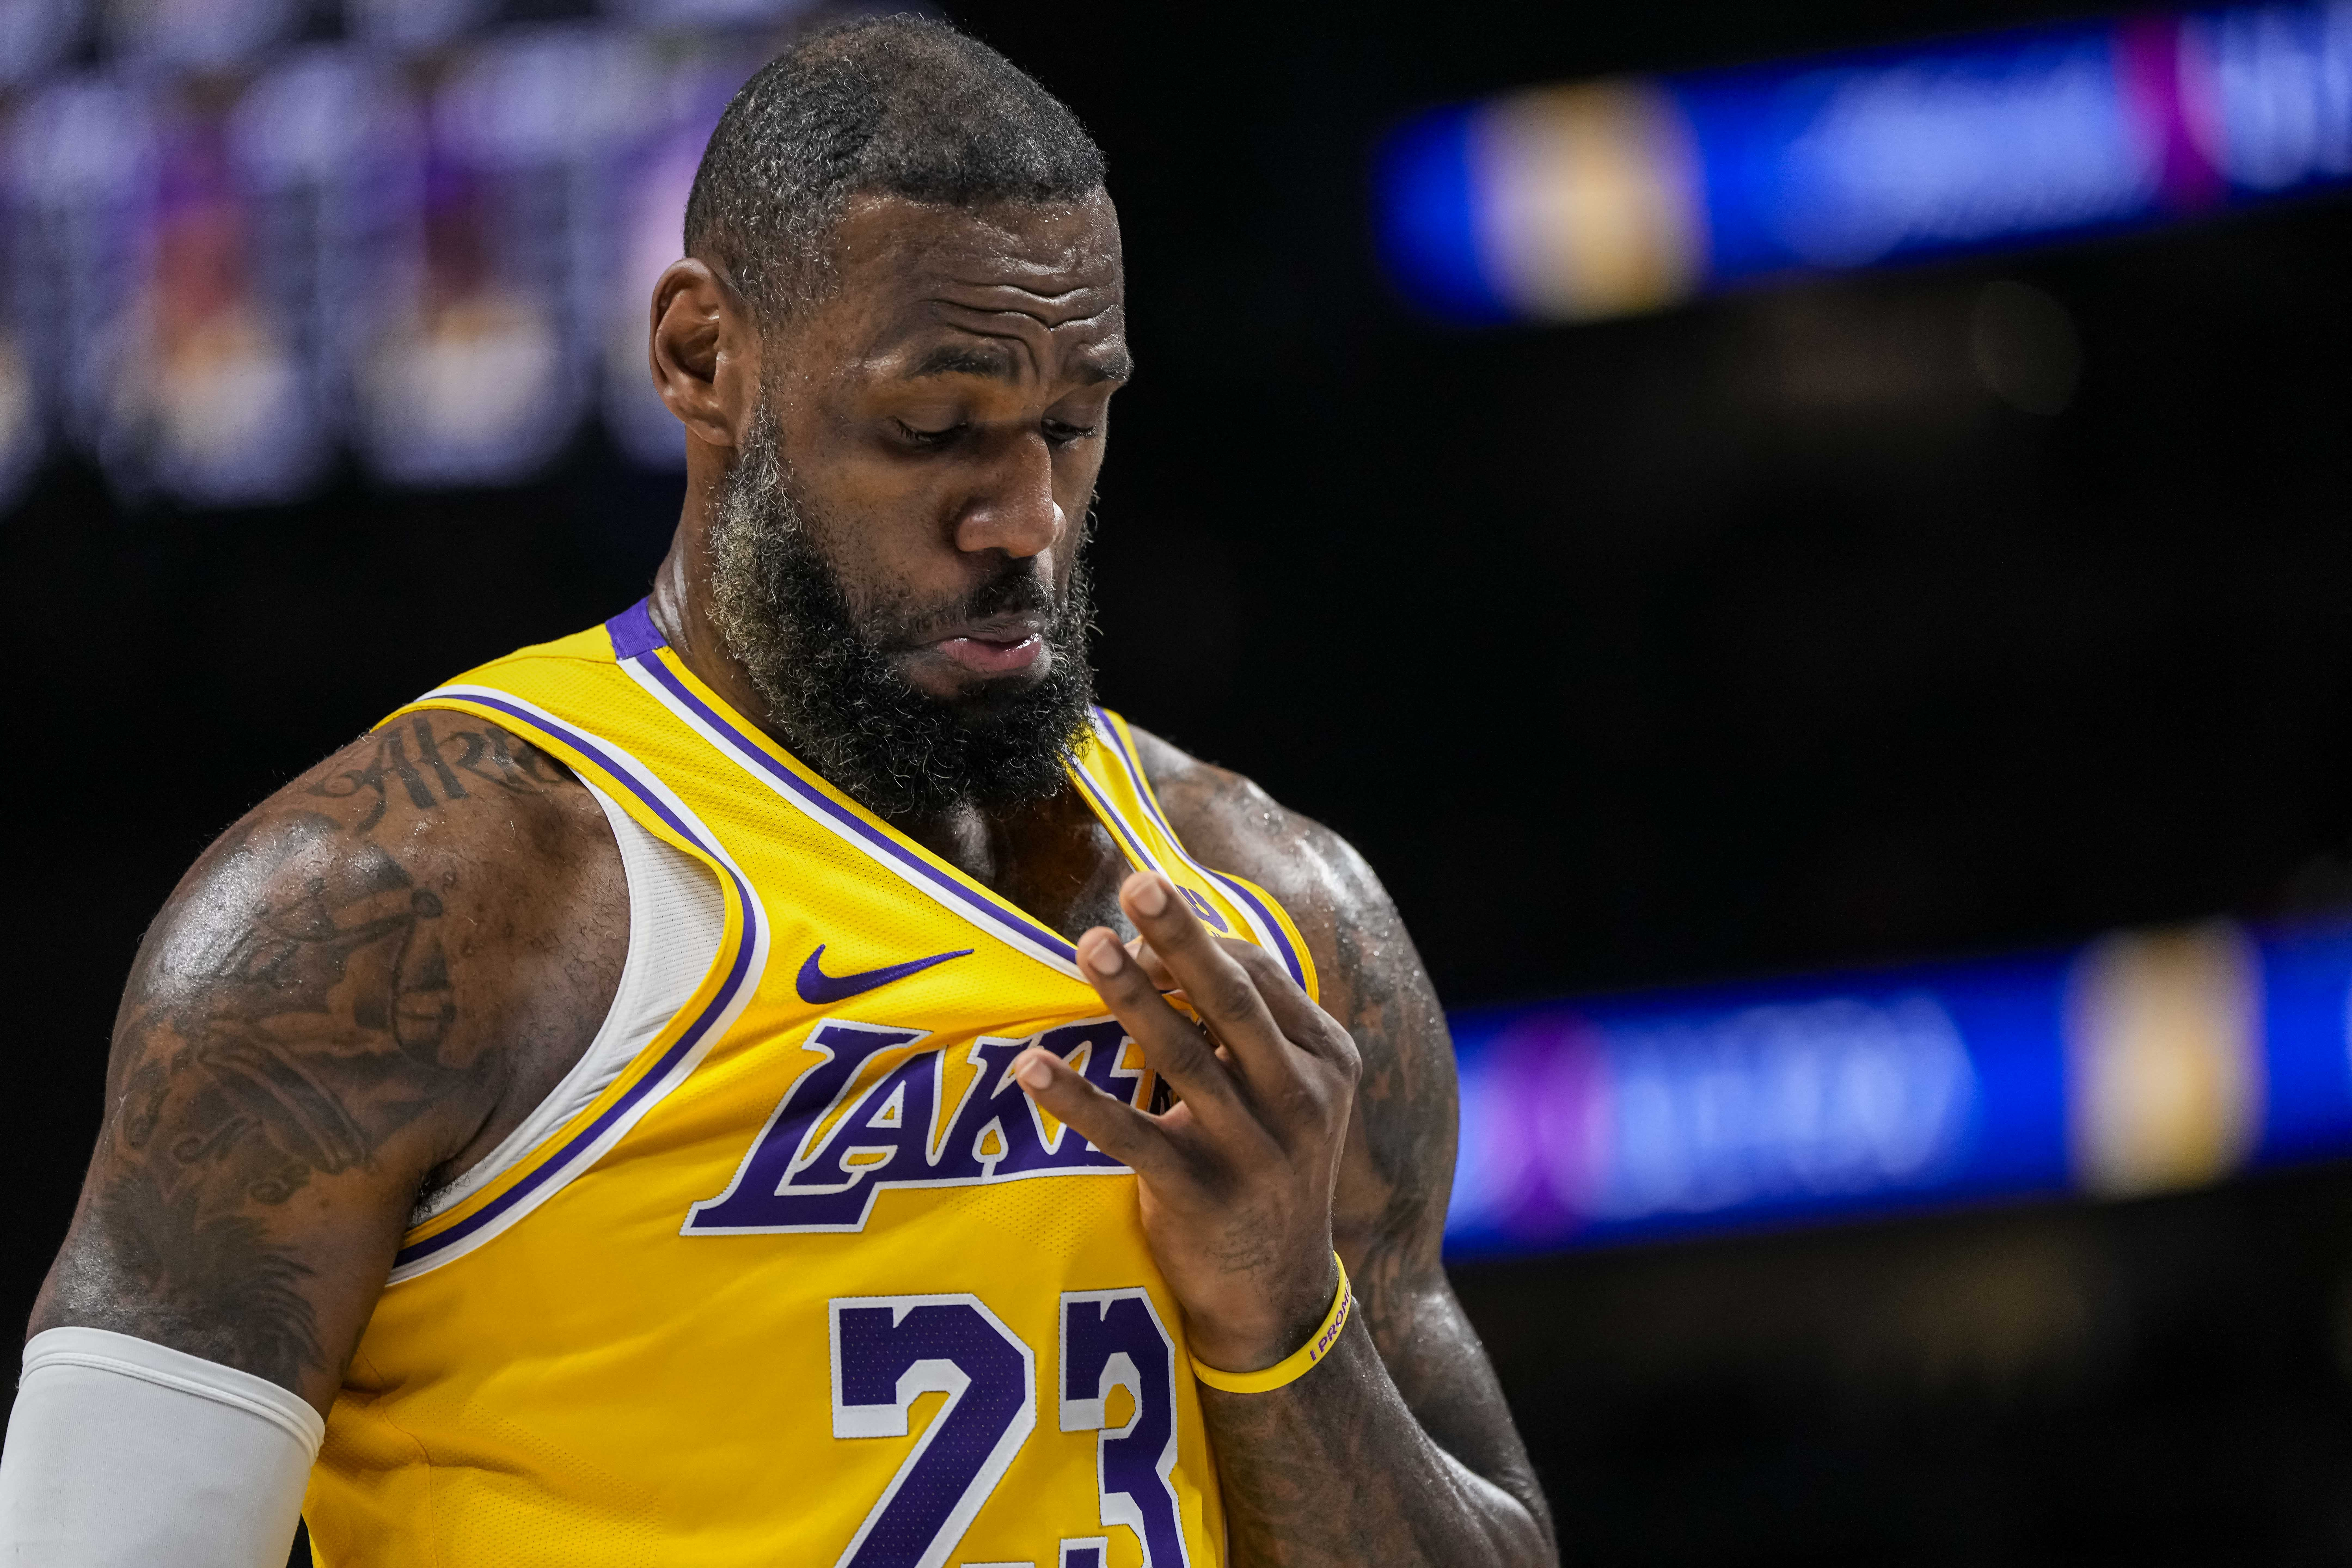 LeBron James tight-lipped amid questions about his playing future | Reuters